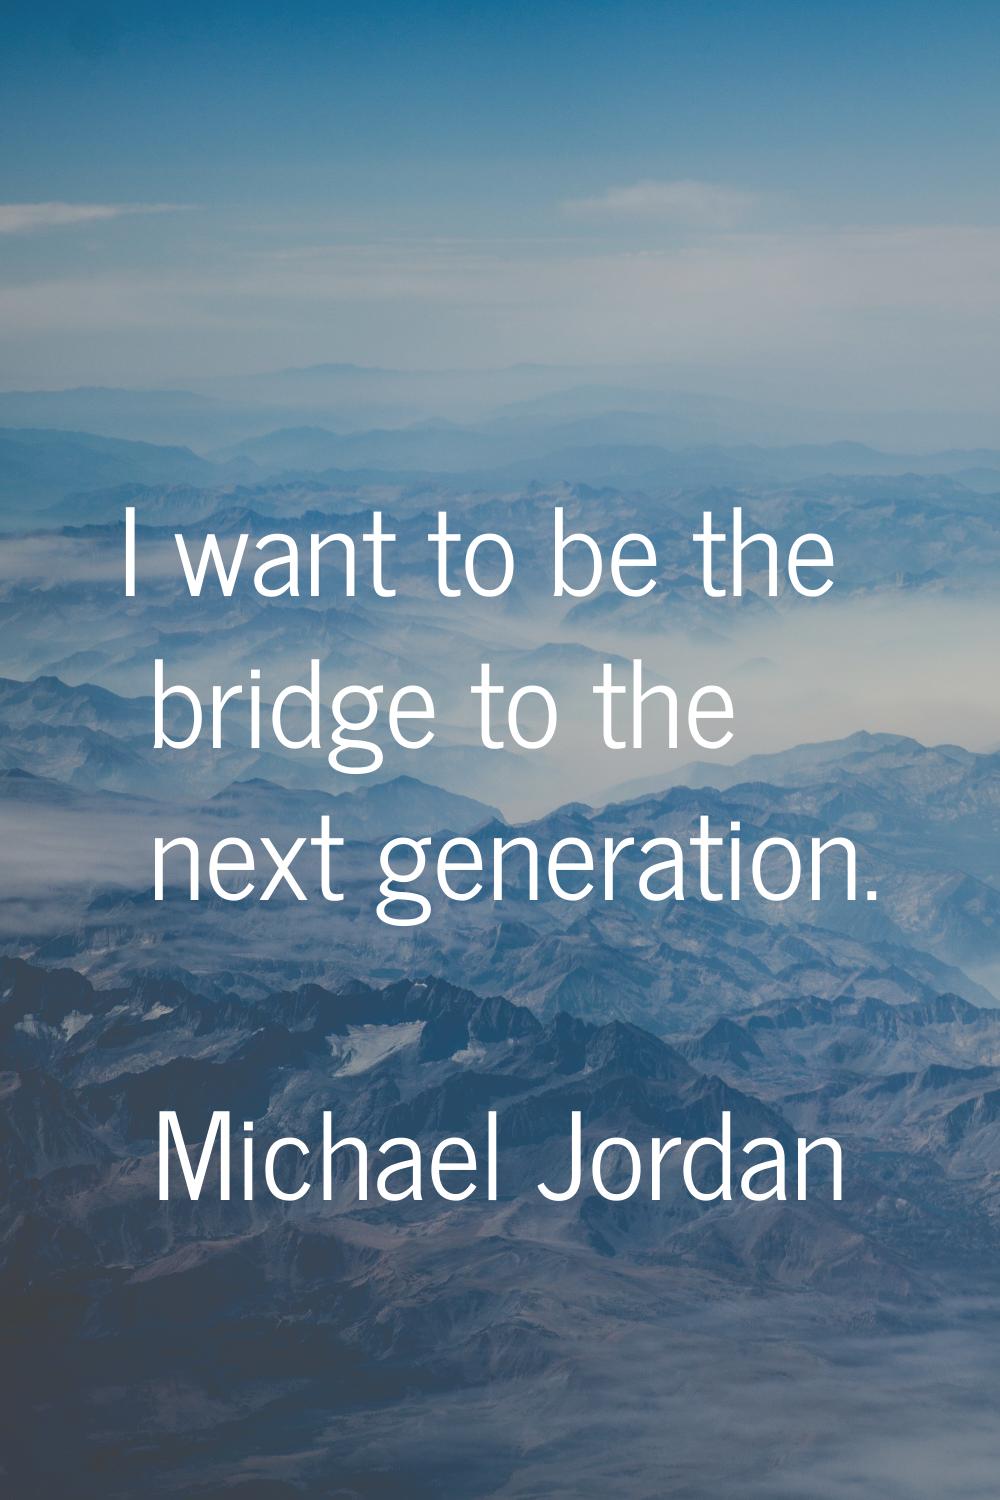 I want to be the bridge to the next generation.